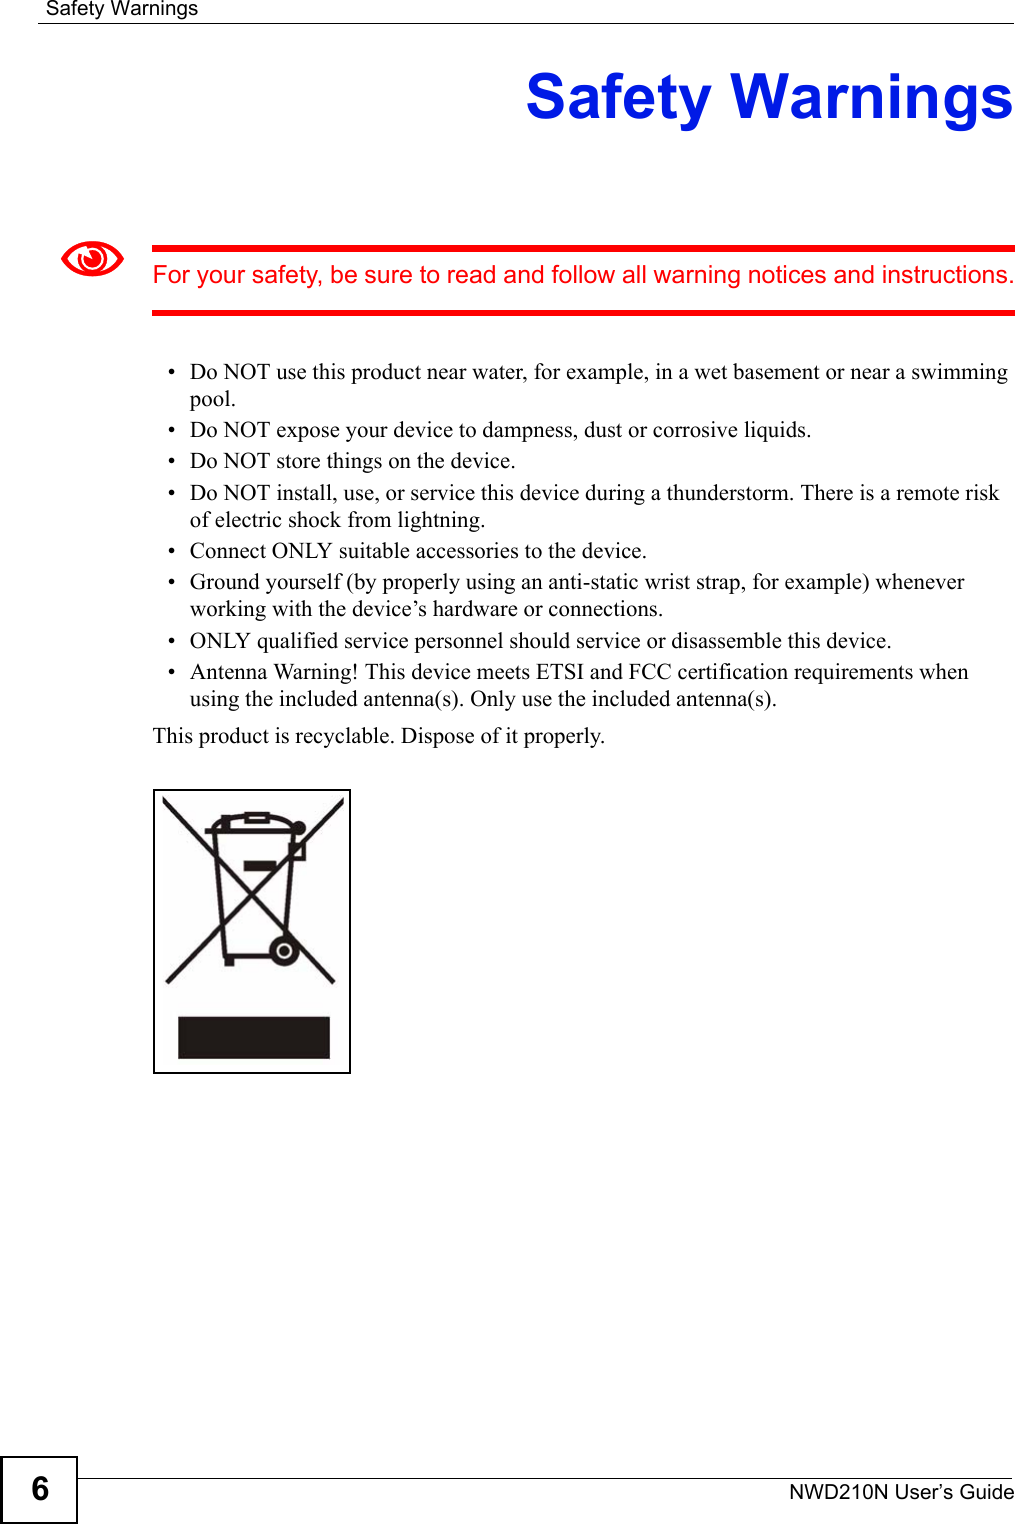 Safety WarningsNWD210N User’s Guide6Safety Warnings1For your safety, be sure to read and follow all warning notices and instructions.• Do NOT use this product near water, for example, in a wet basement or near a swimming pool.• Do NOT expose your device to dampness, dust or corrosive liquids.• Do NOT store things on the device.• Do NOT install, use, or service this device during a thunderstorm. There is a remote risk of electric shock from lightning.• Connect ONLY suitable accessories to the device.• Ground yourself (by properly using an anti-static wrist strap, for example) whenever working with the device’s hardware or connections.• ONLY qualified service personnel should service or disassemble this device.• Antenna Warning! This device meets ETSI and FCC certification requirements when using the included antenna(s). Only use the included antenna(s).This product is recyclable. Dispose of it properly.  